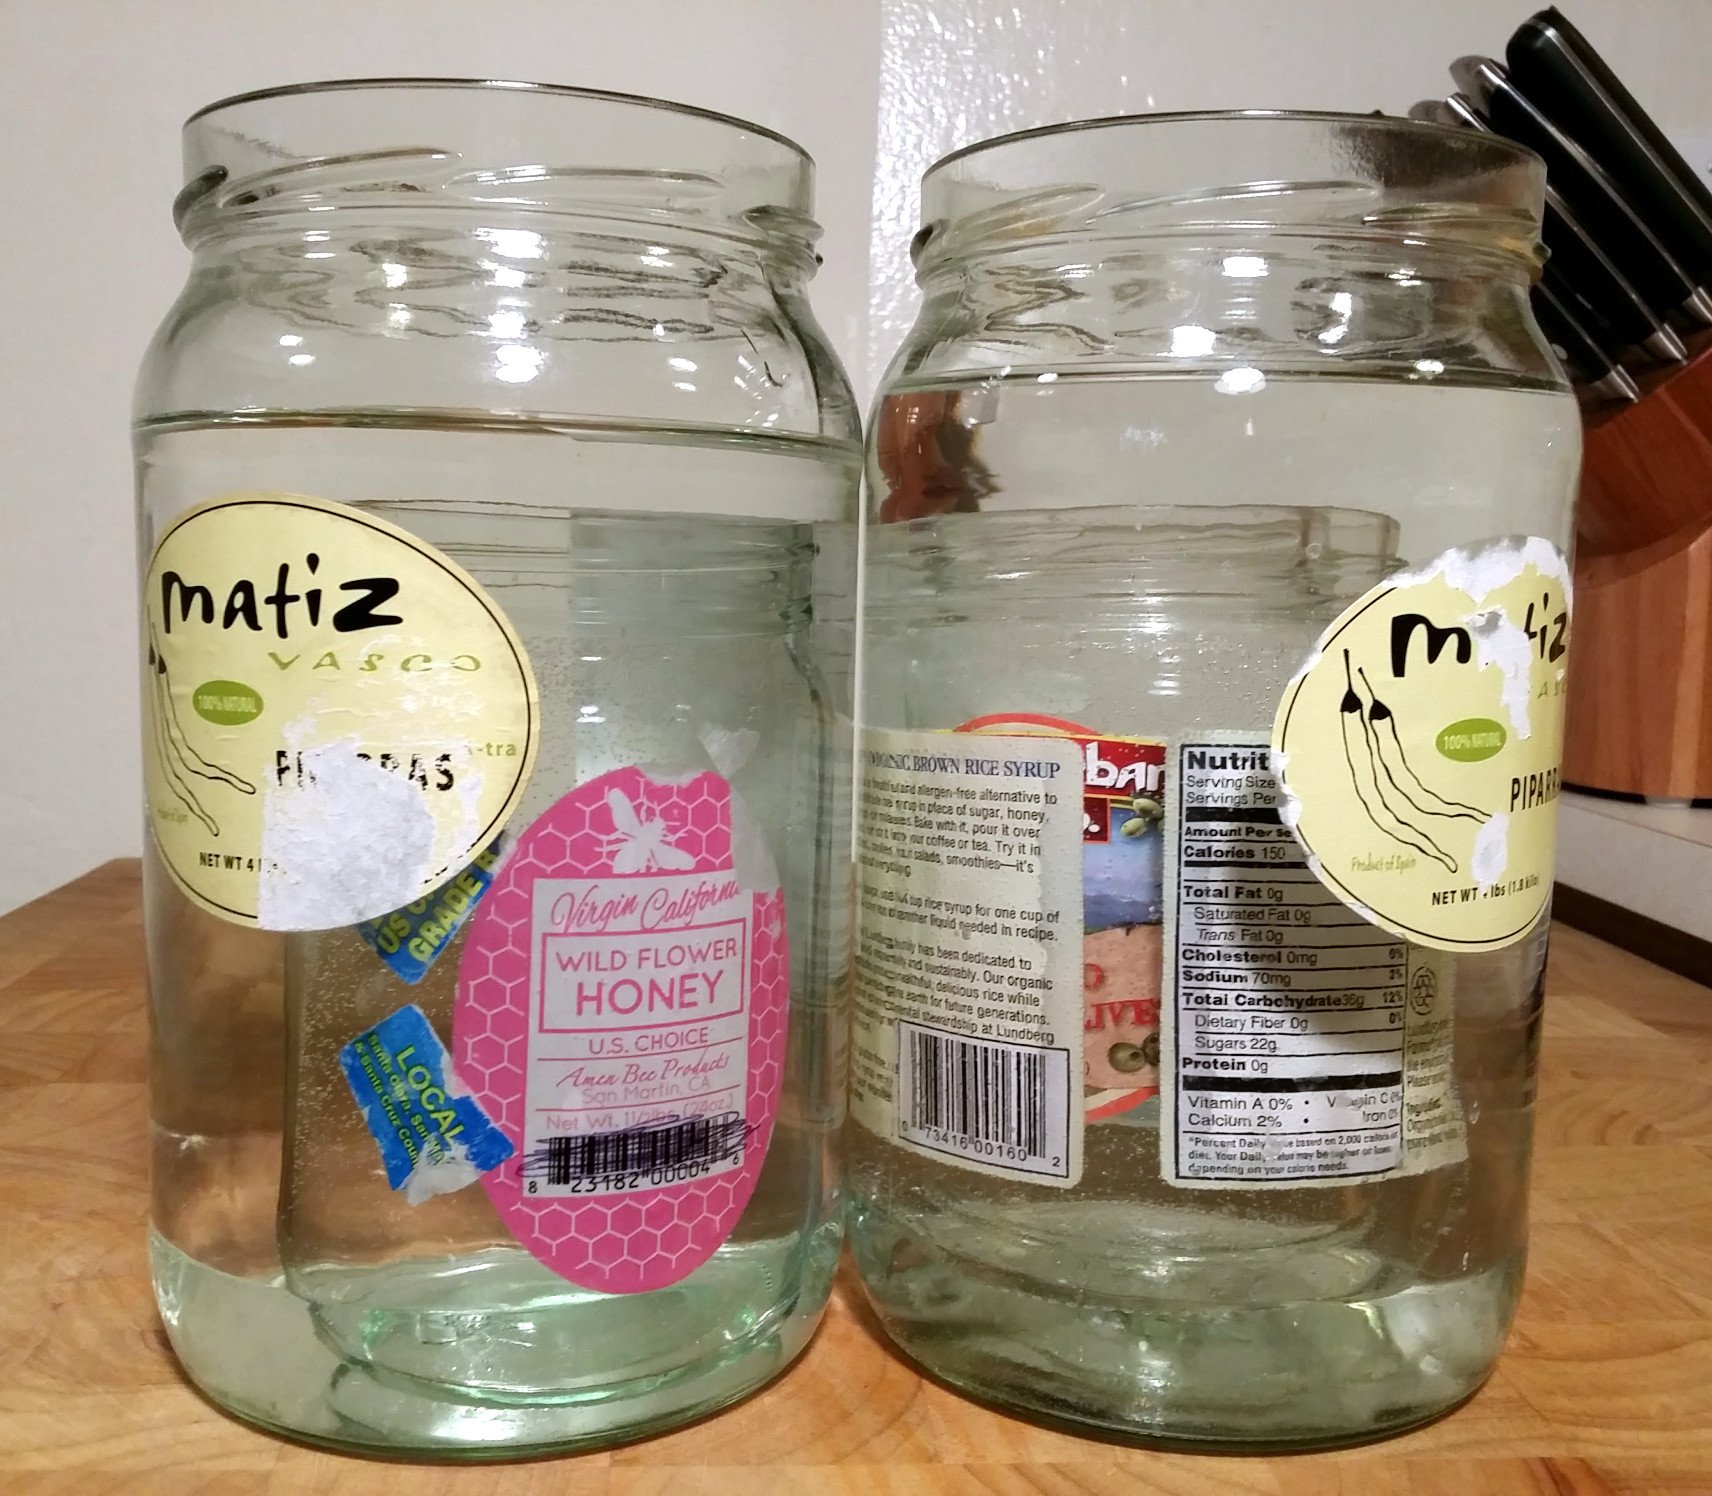 How to Easily Remove Labels and Smells to Upcycle Jars